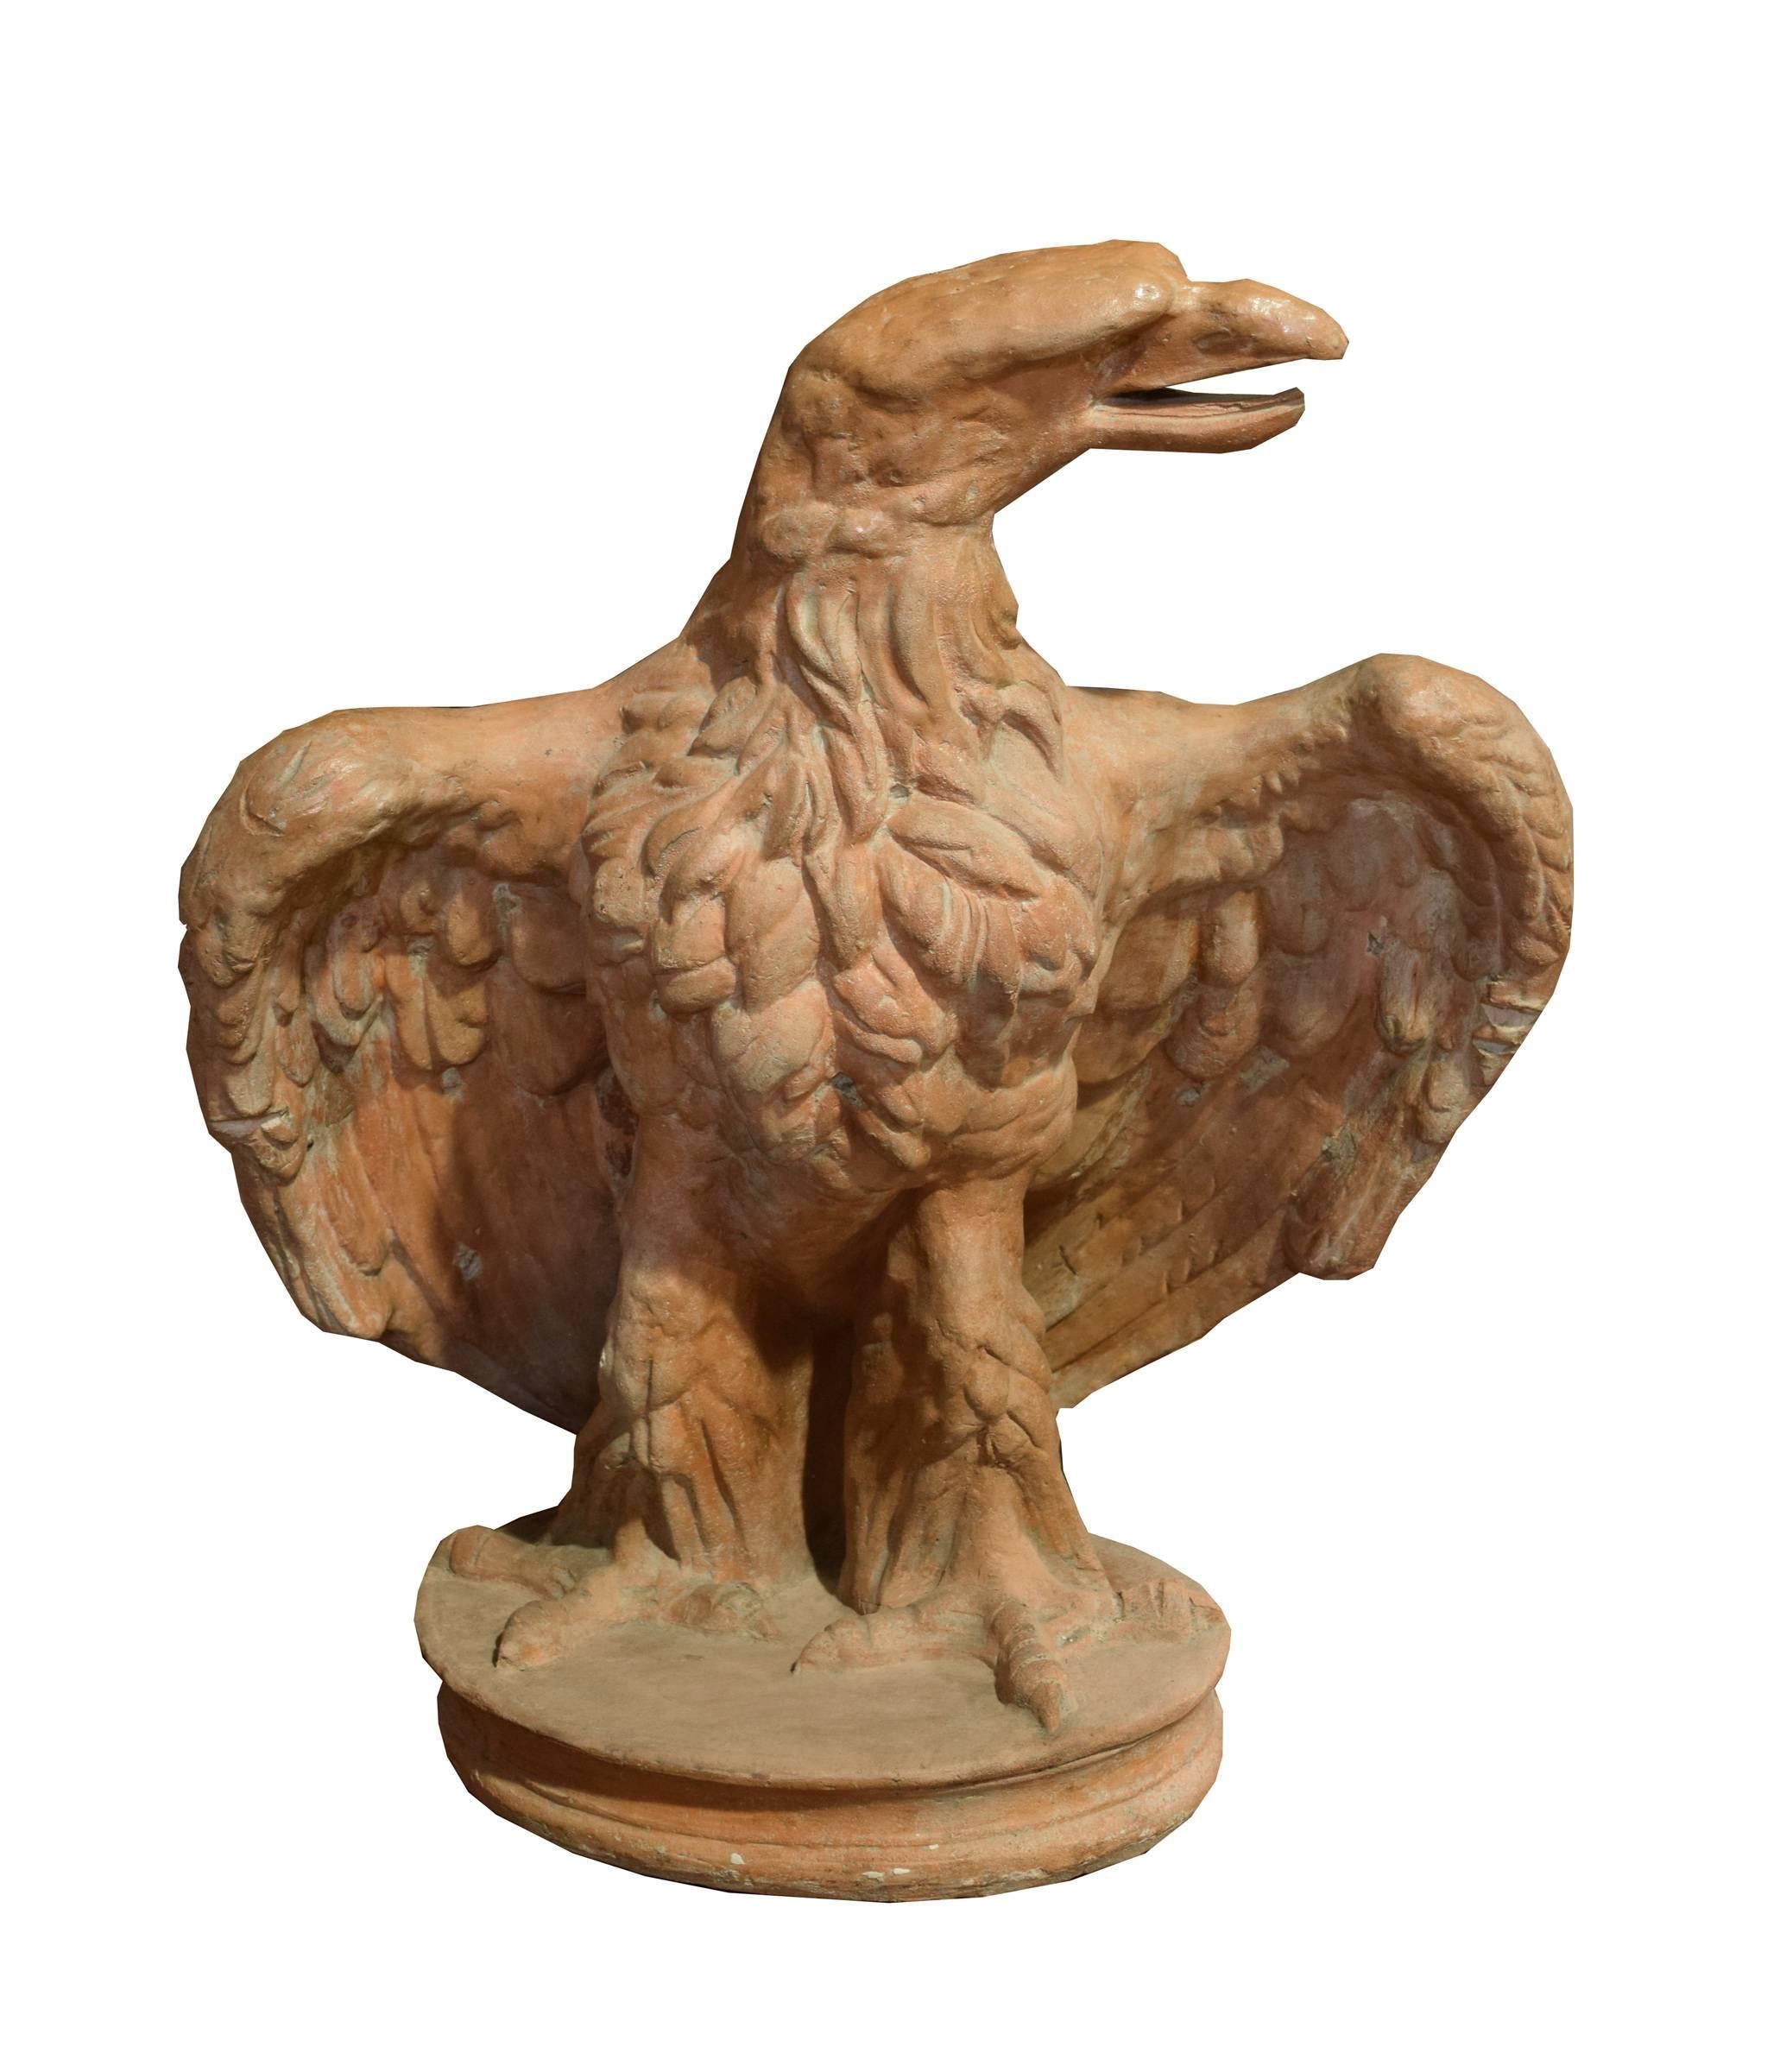 A majestic pair of circa 1880 life-sized terra cotta eagles from Italy.